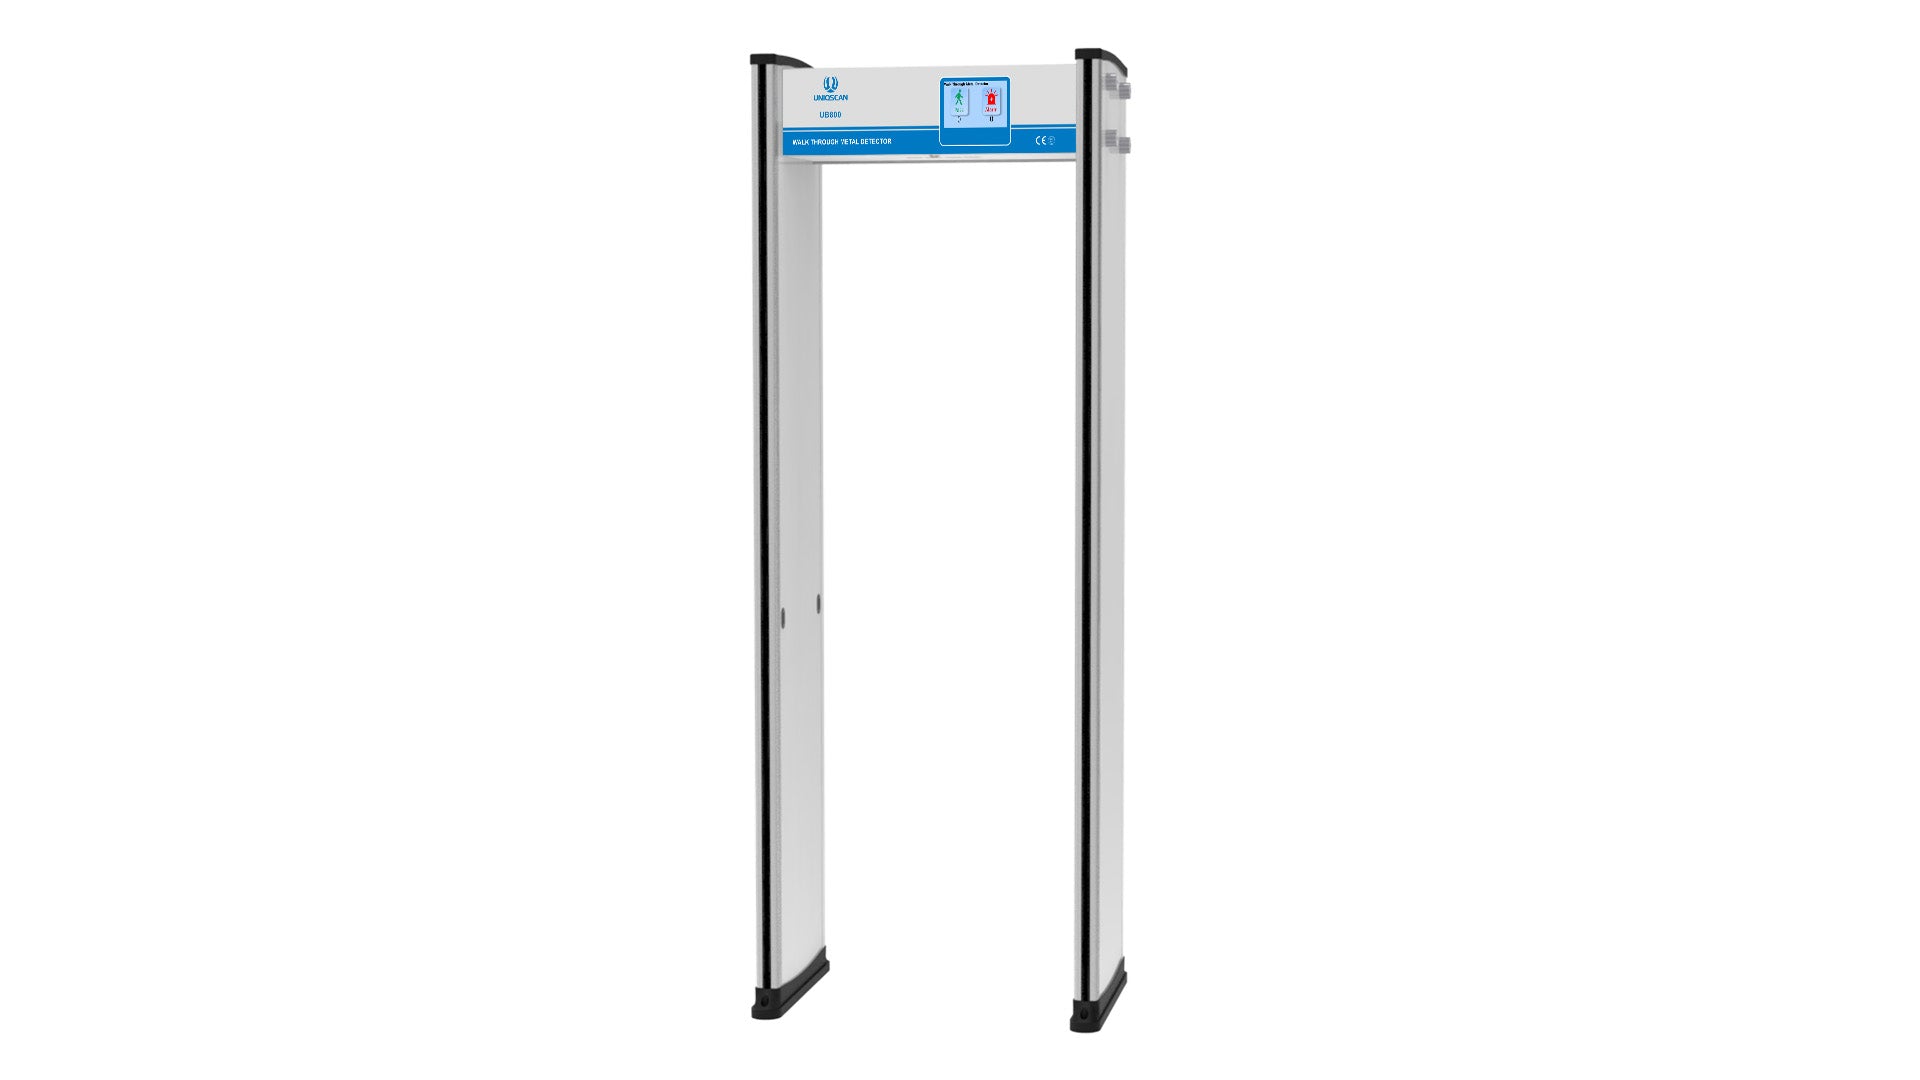 Parking Access Control Boom Barrier Security Gate: UT530A